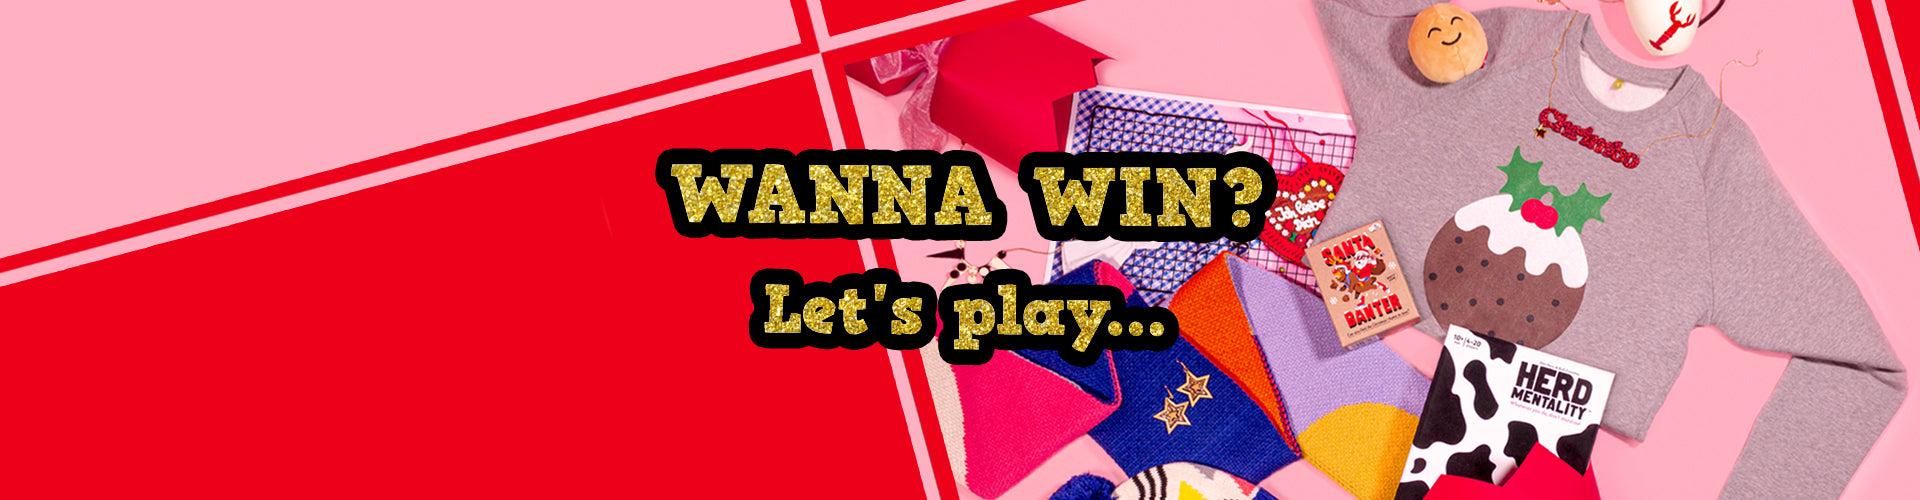 Wanna win? Let's play!